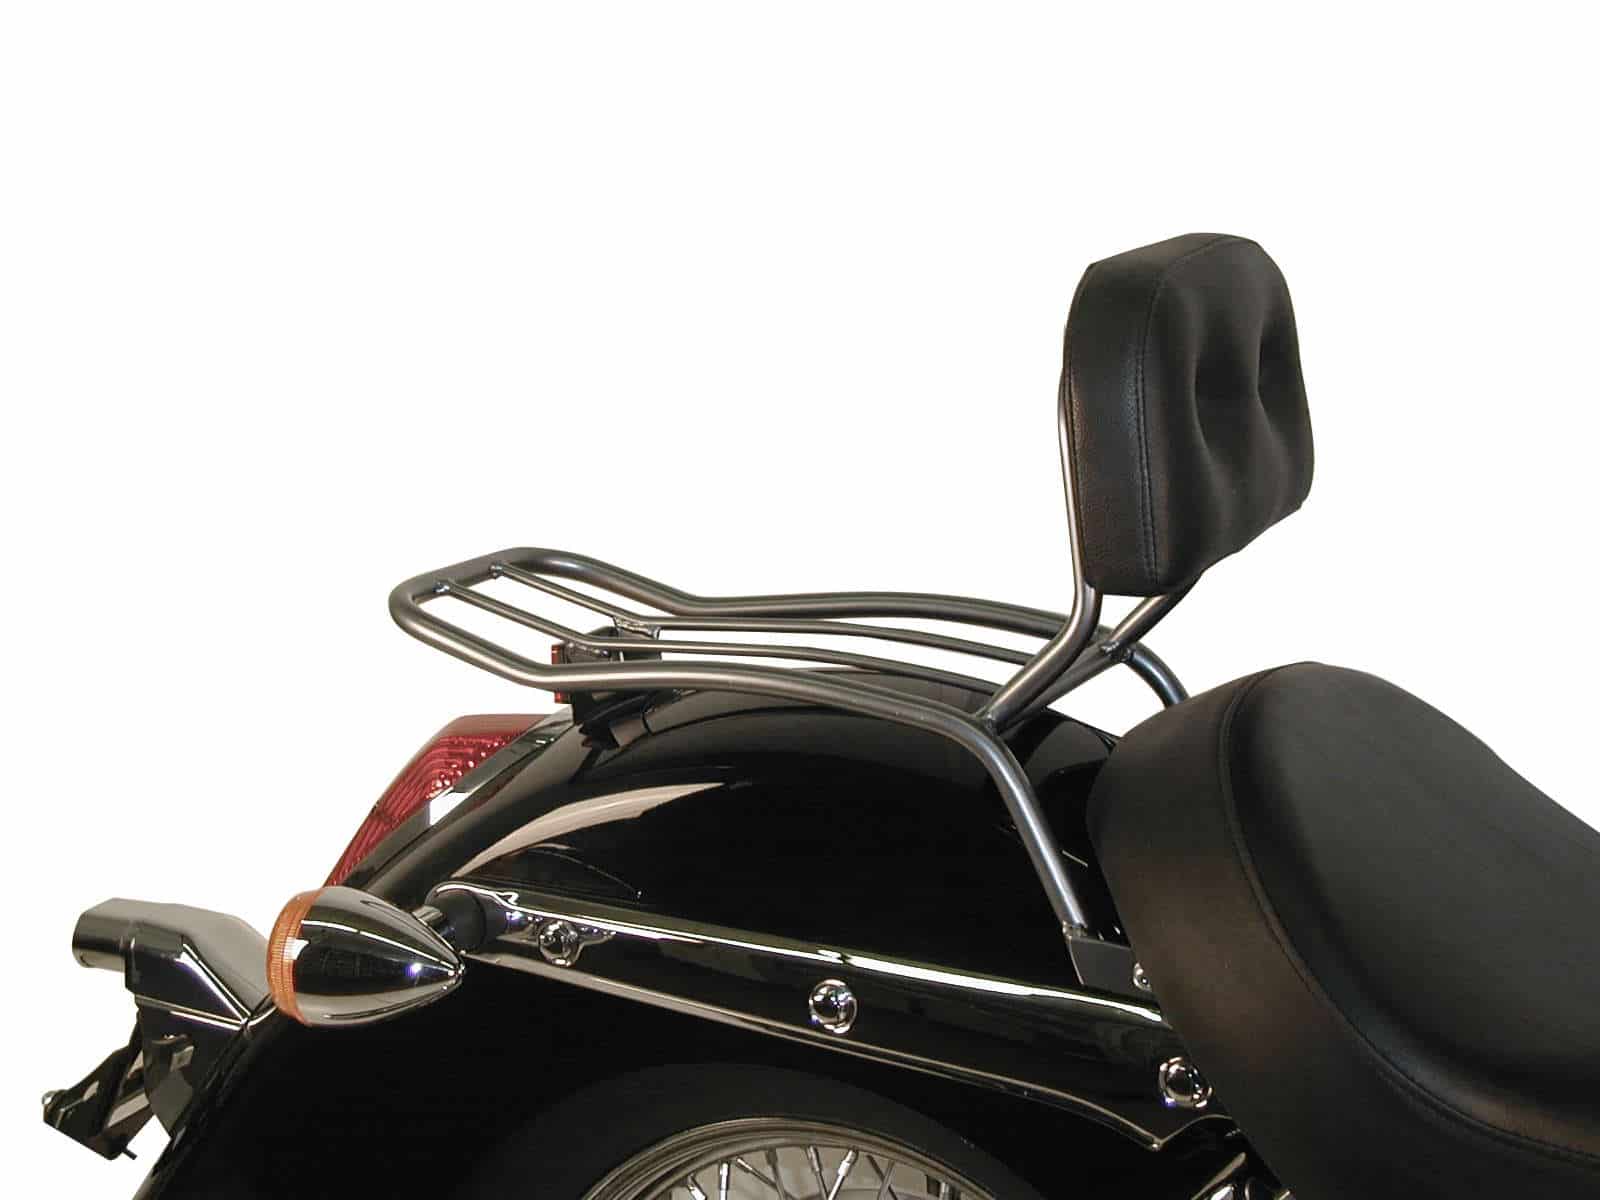 Solorack with backrest for Honda VT 750 Shadow (2008-)